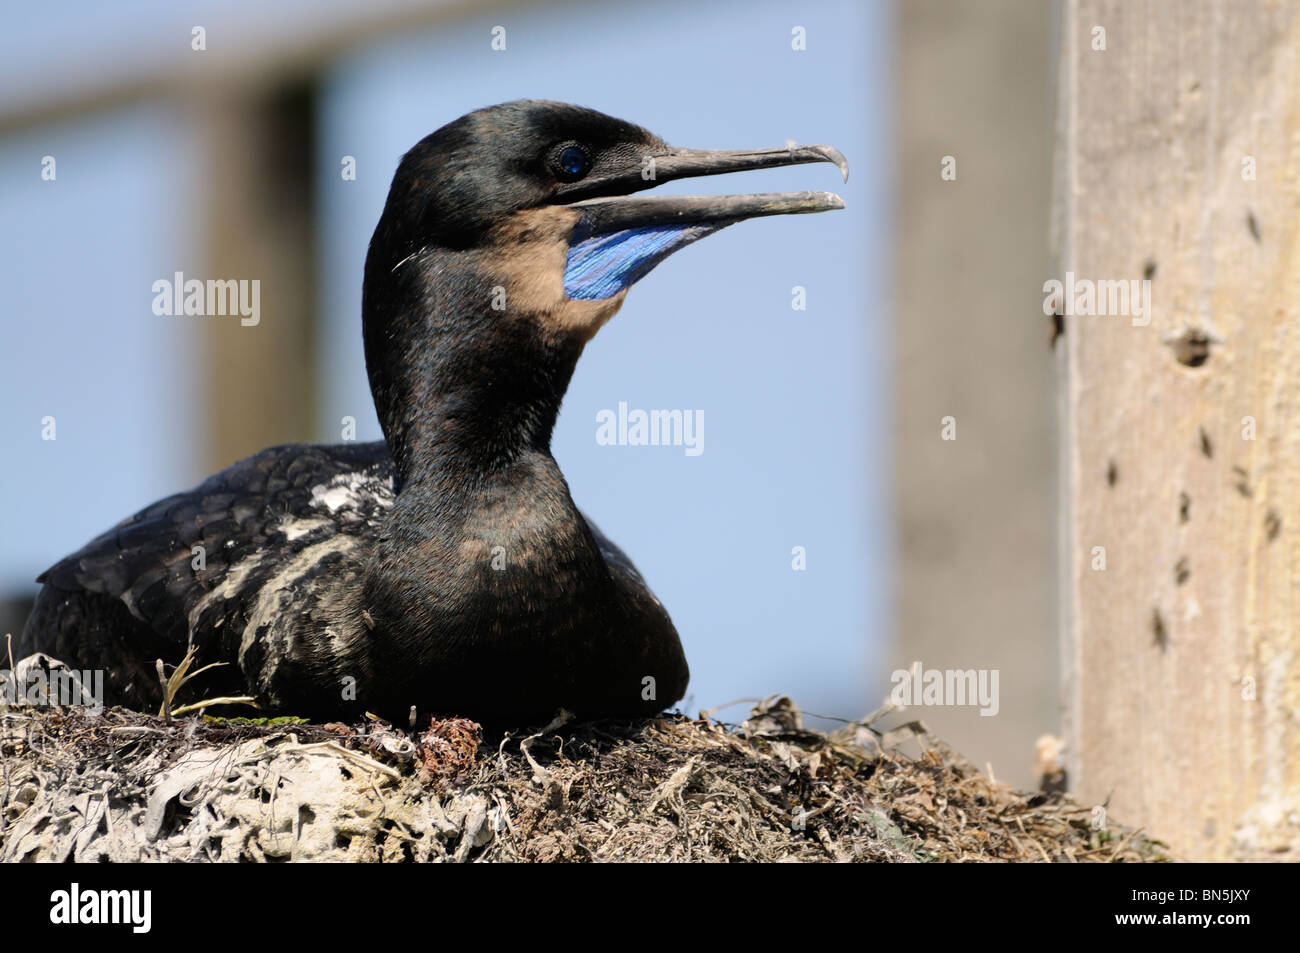 Stock photo of a brandt's cormorant sitting on a nest, Elkhorn Slough, California. Stock Photo